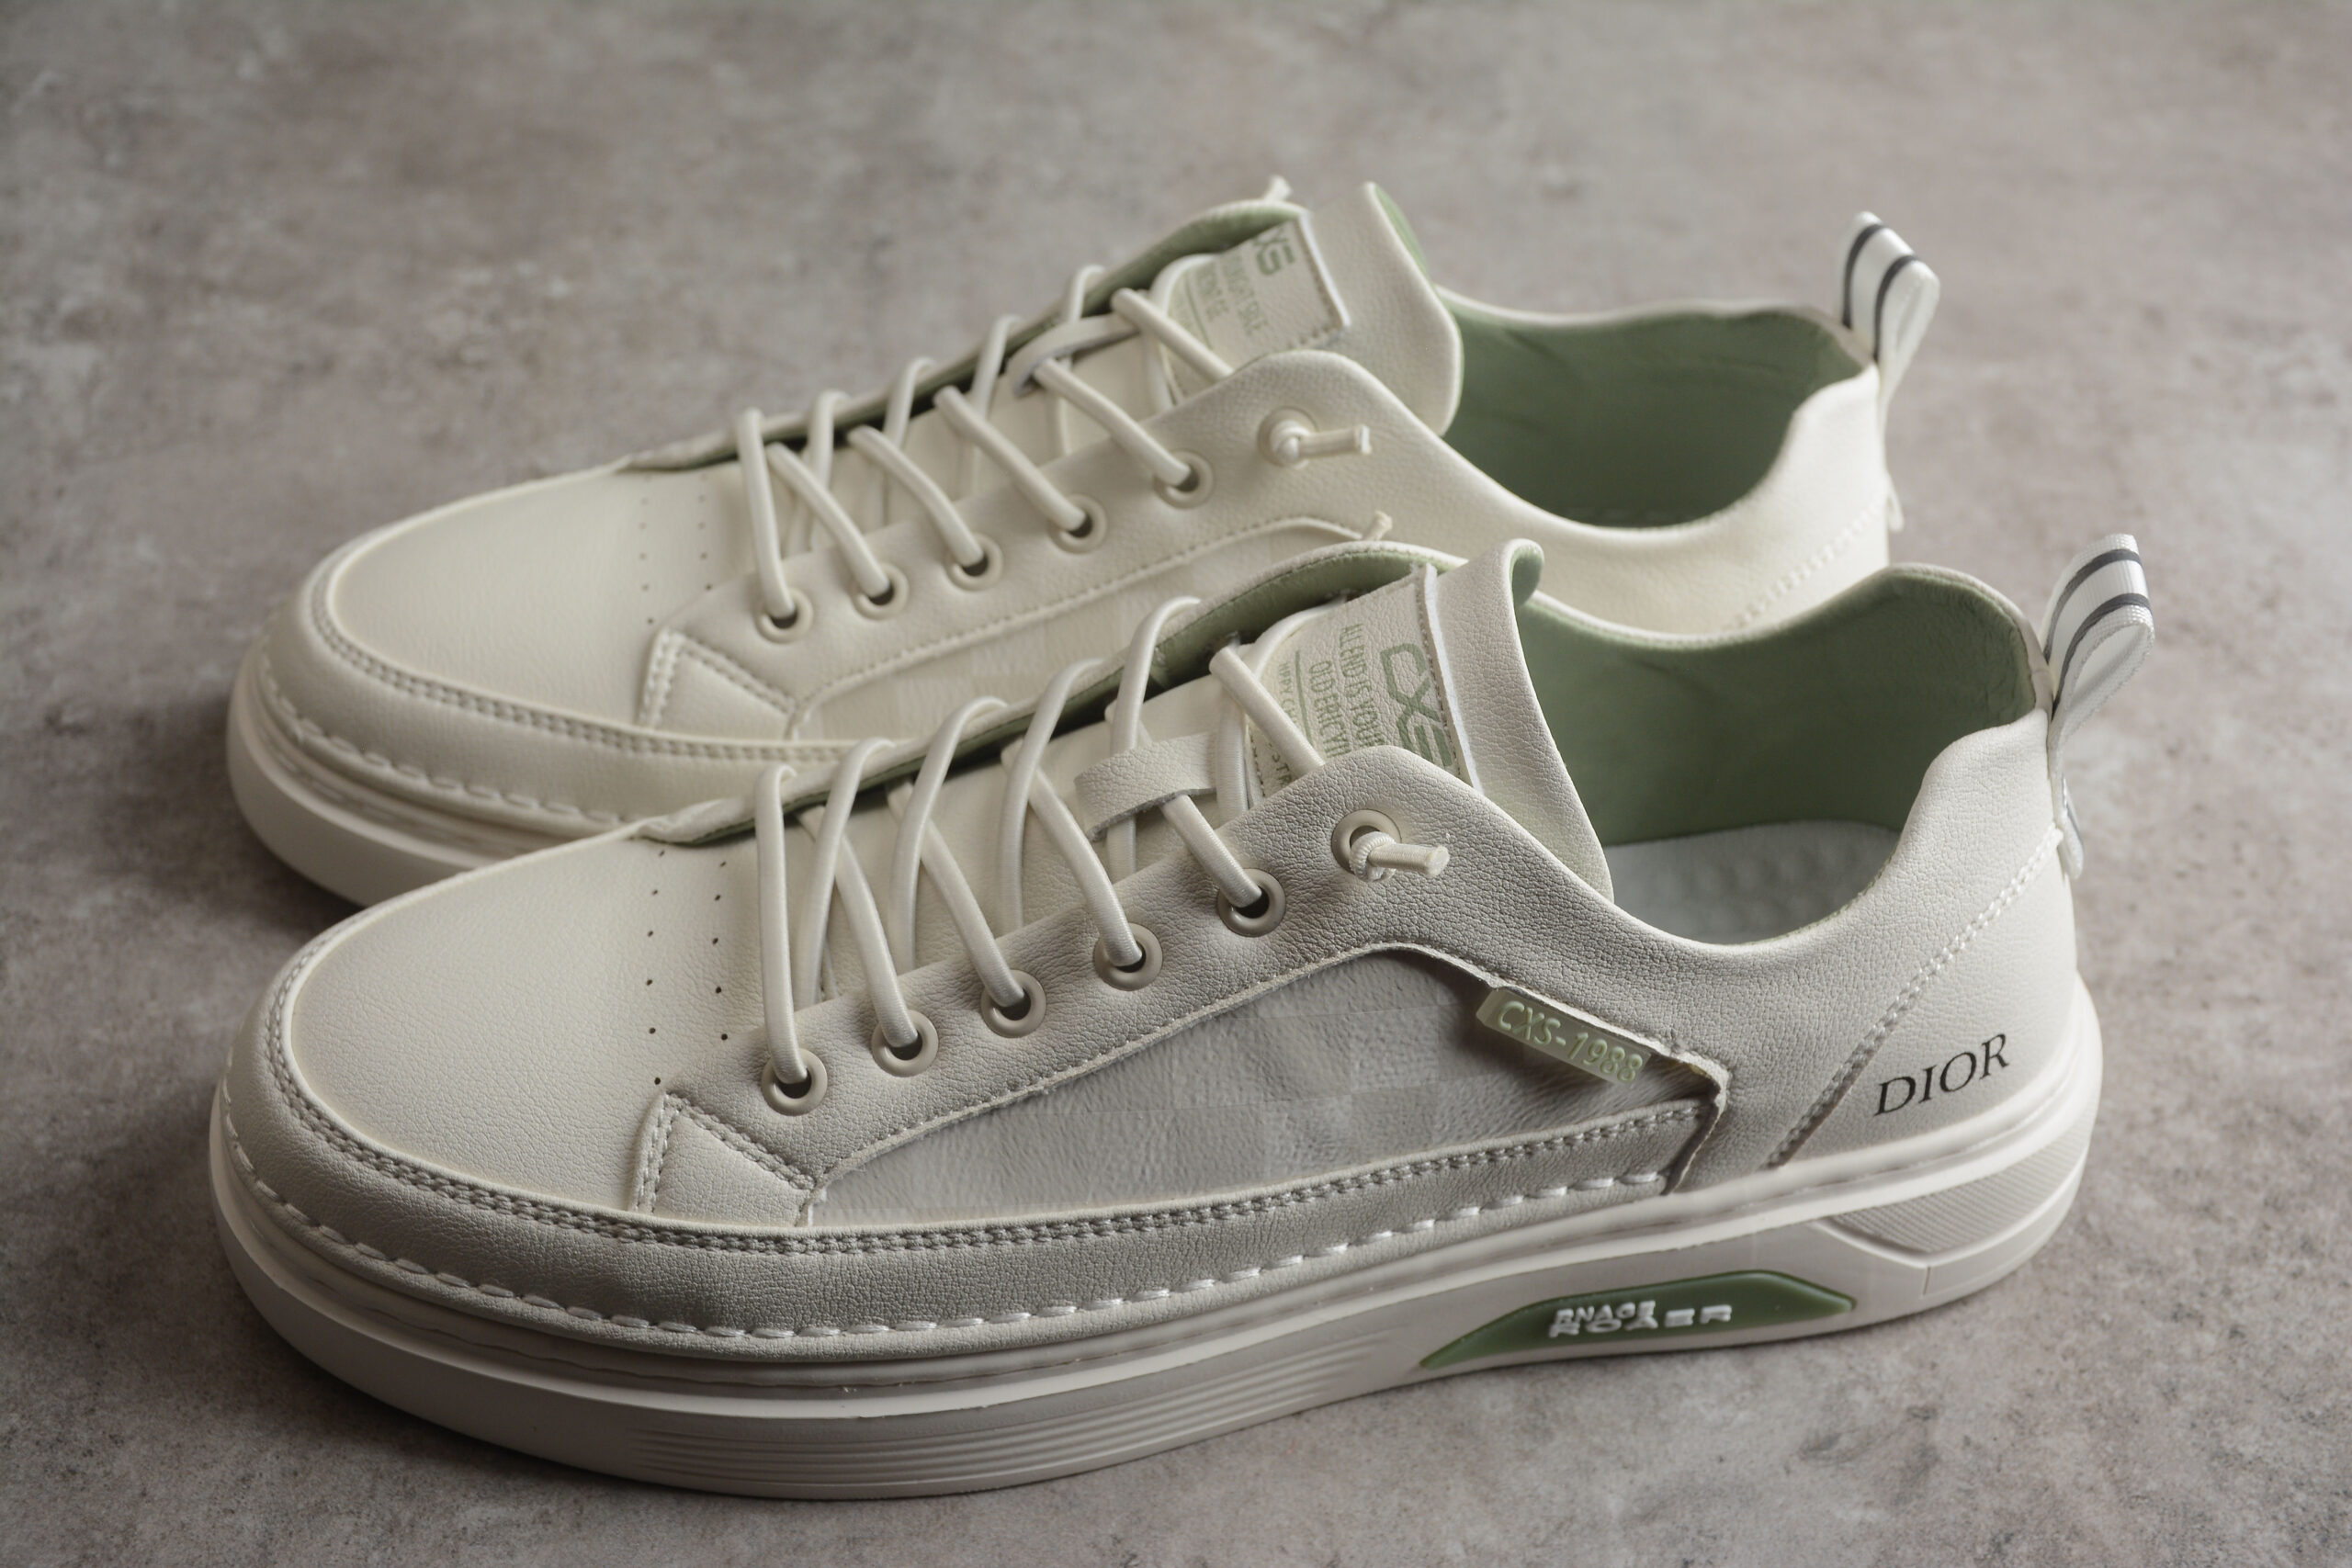 Converse DIOR | C9157 41 - The Foot Planet